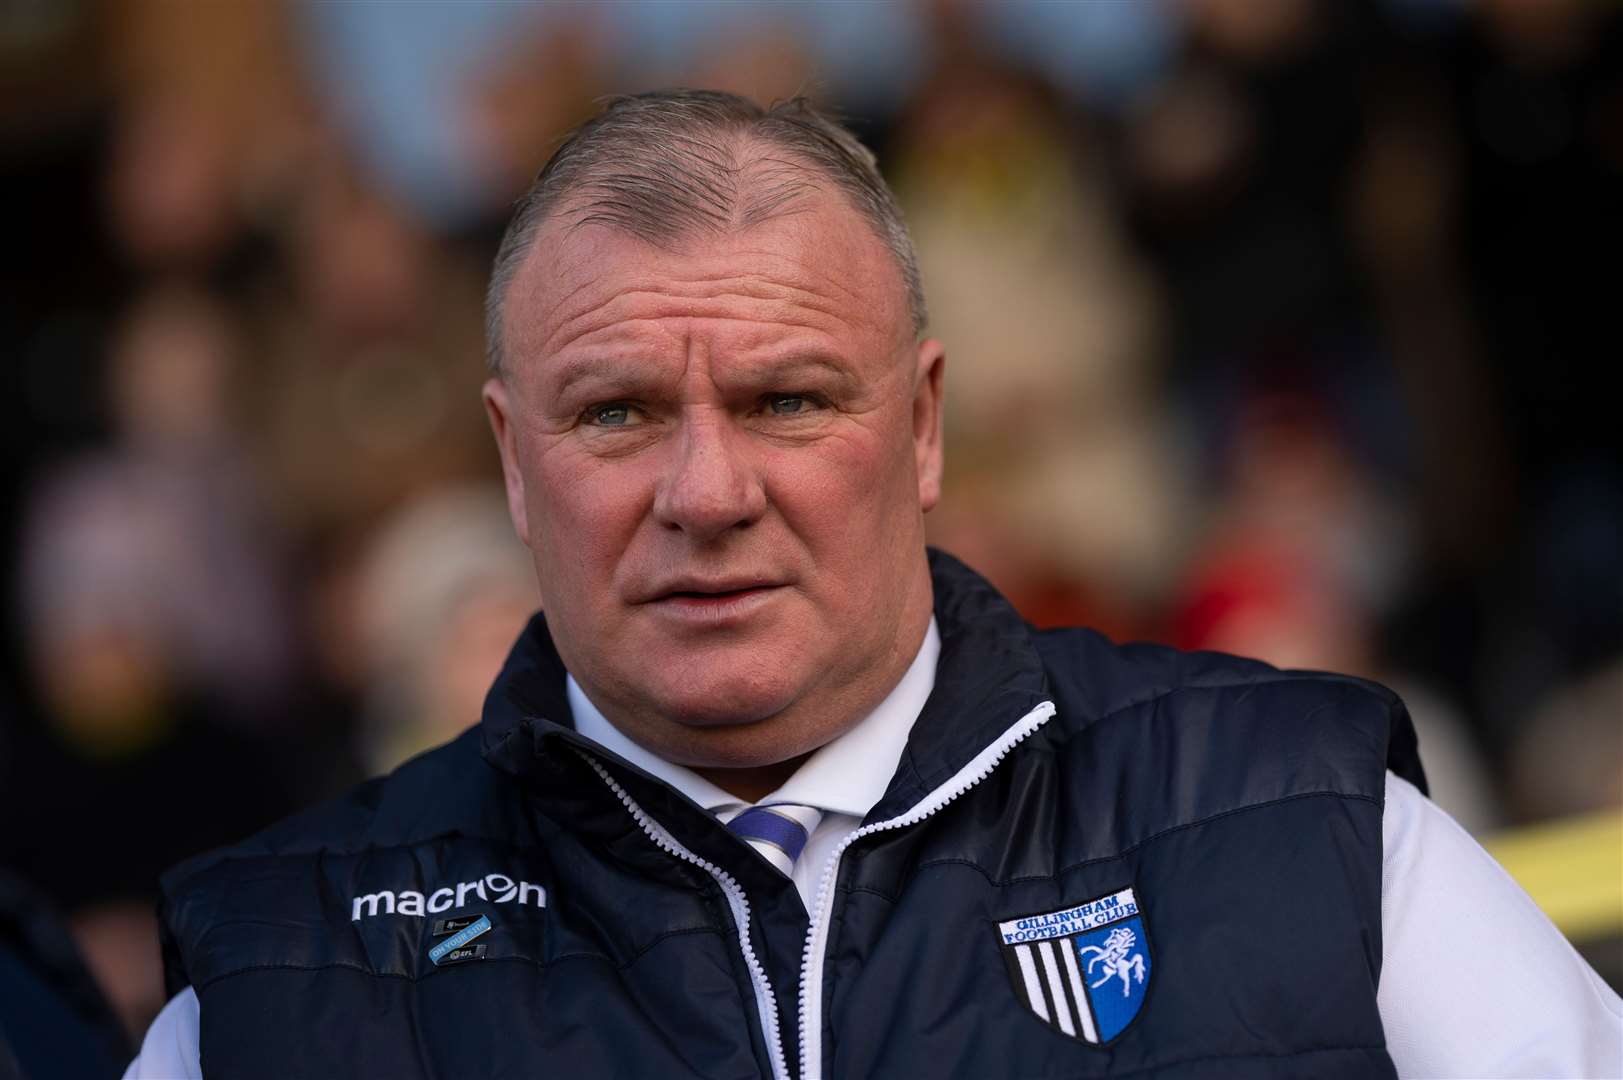 Gillingham manager Steve Evans was back at Rotherham on Tuesday night but watched his side well beaten